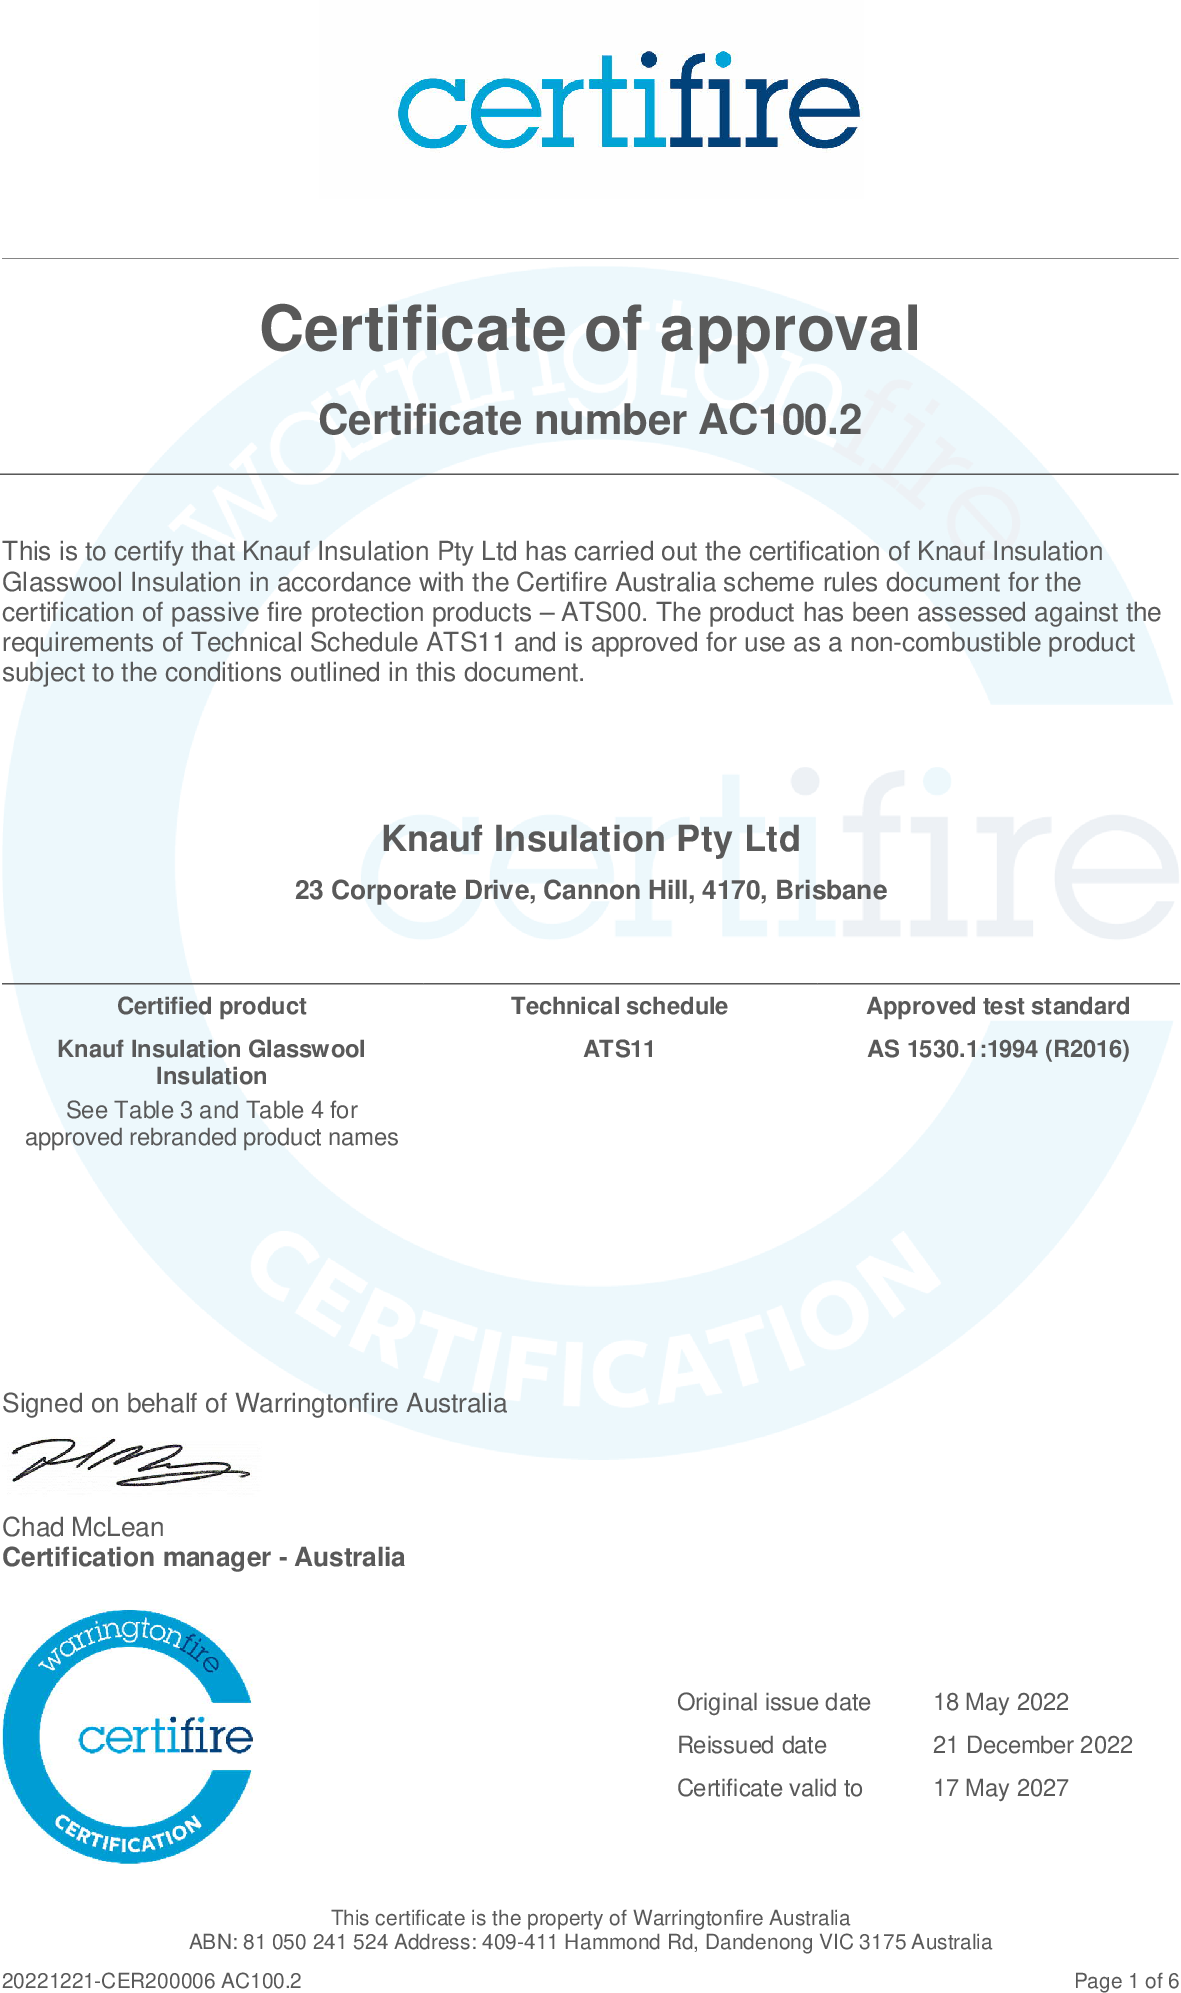 AS 1530.1 Non-combustible certification - Certifire - AC100.2